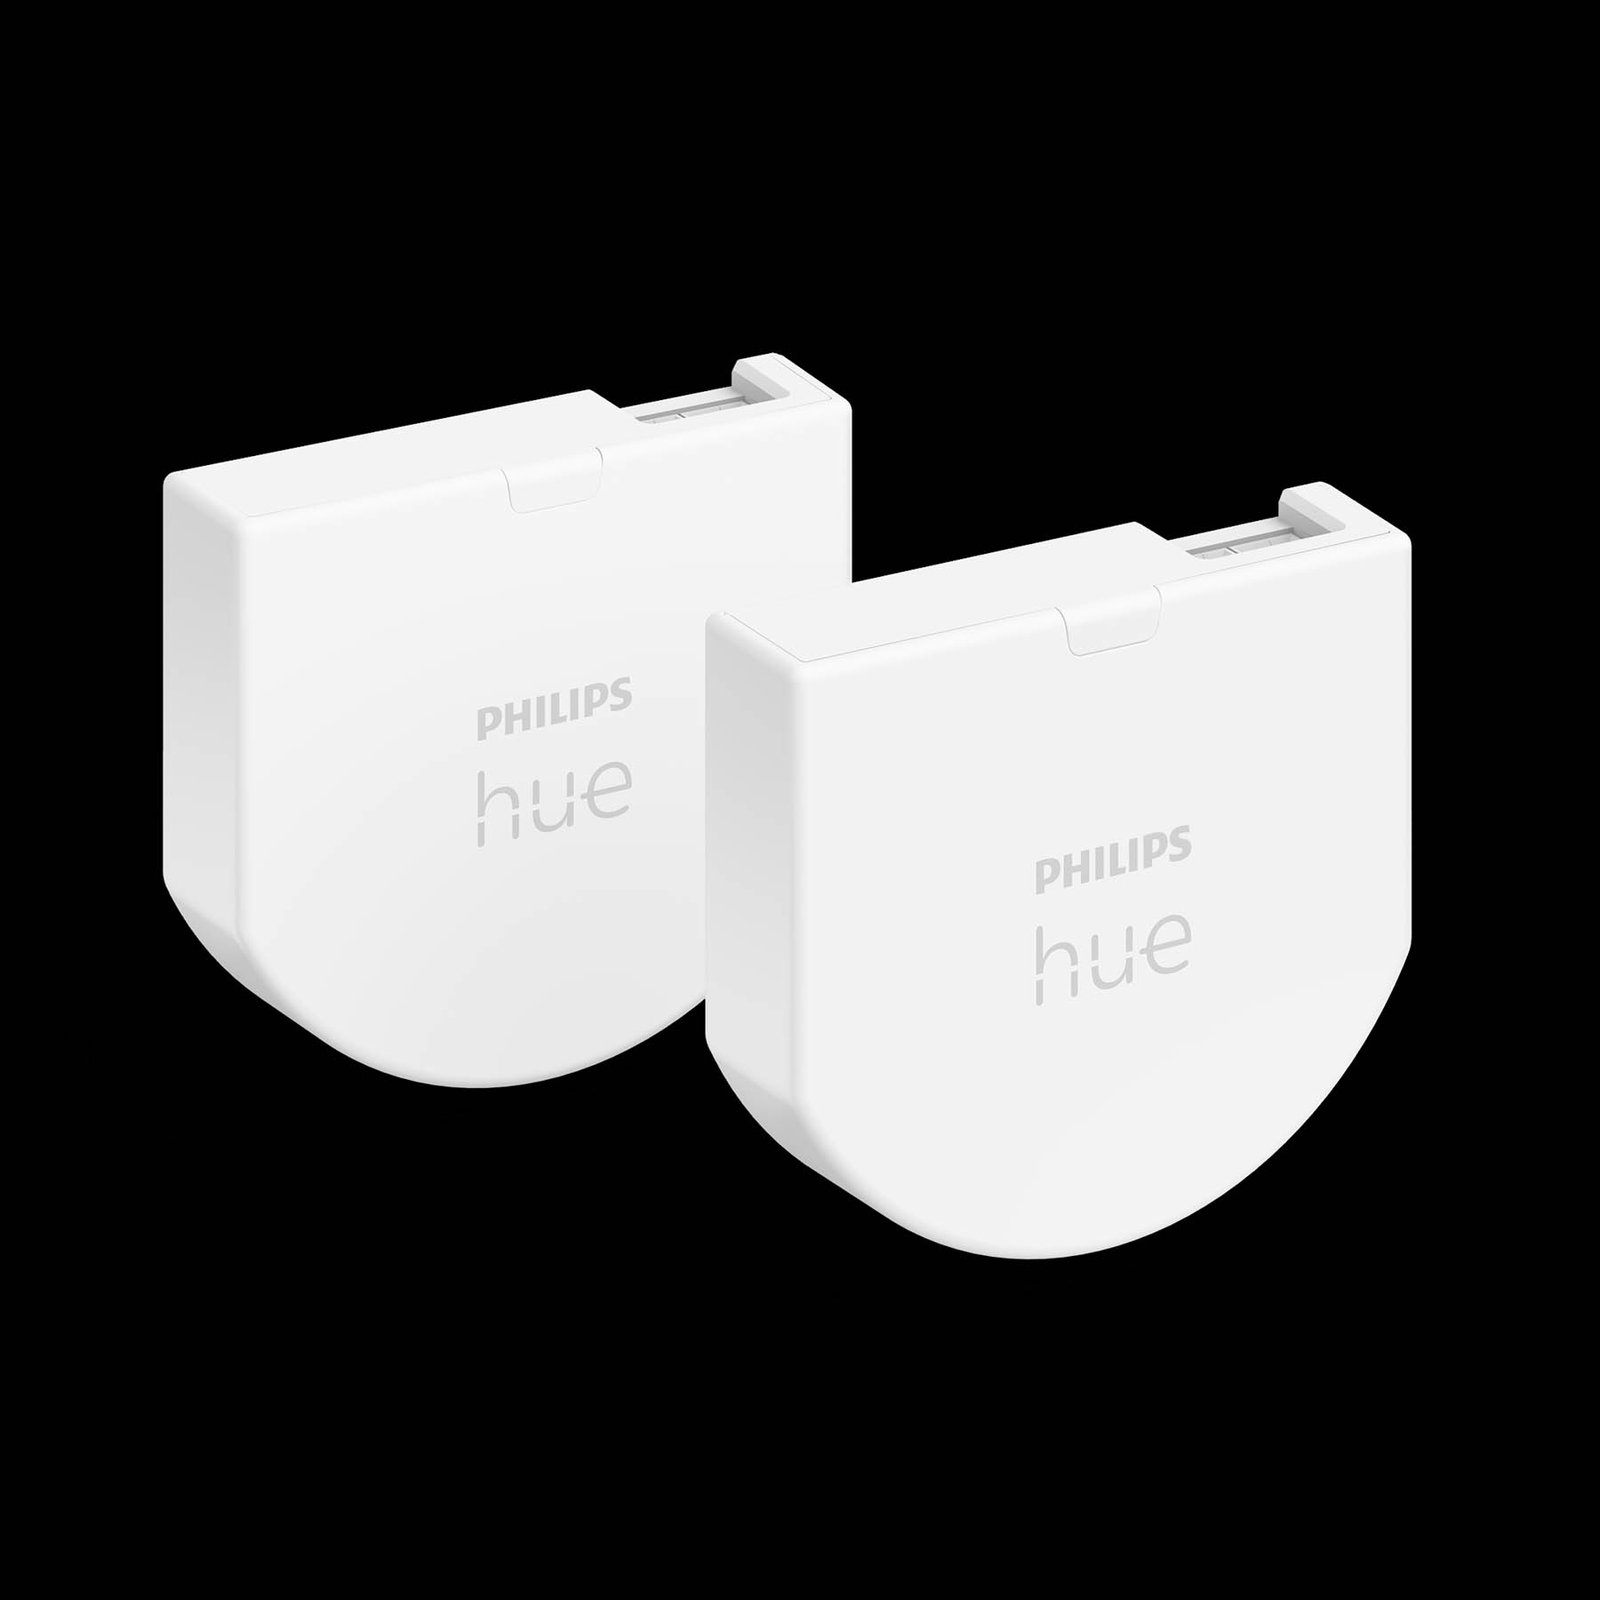 Philips Hue wall switch module, 2-pack